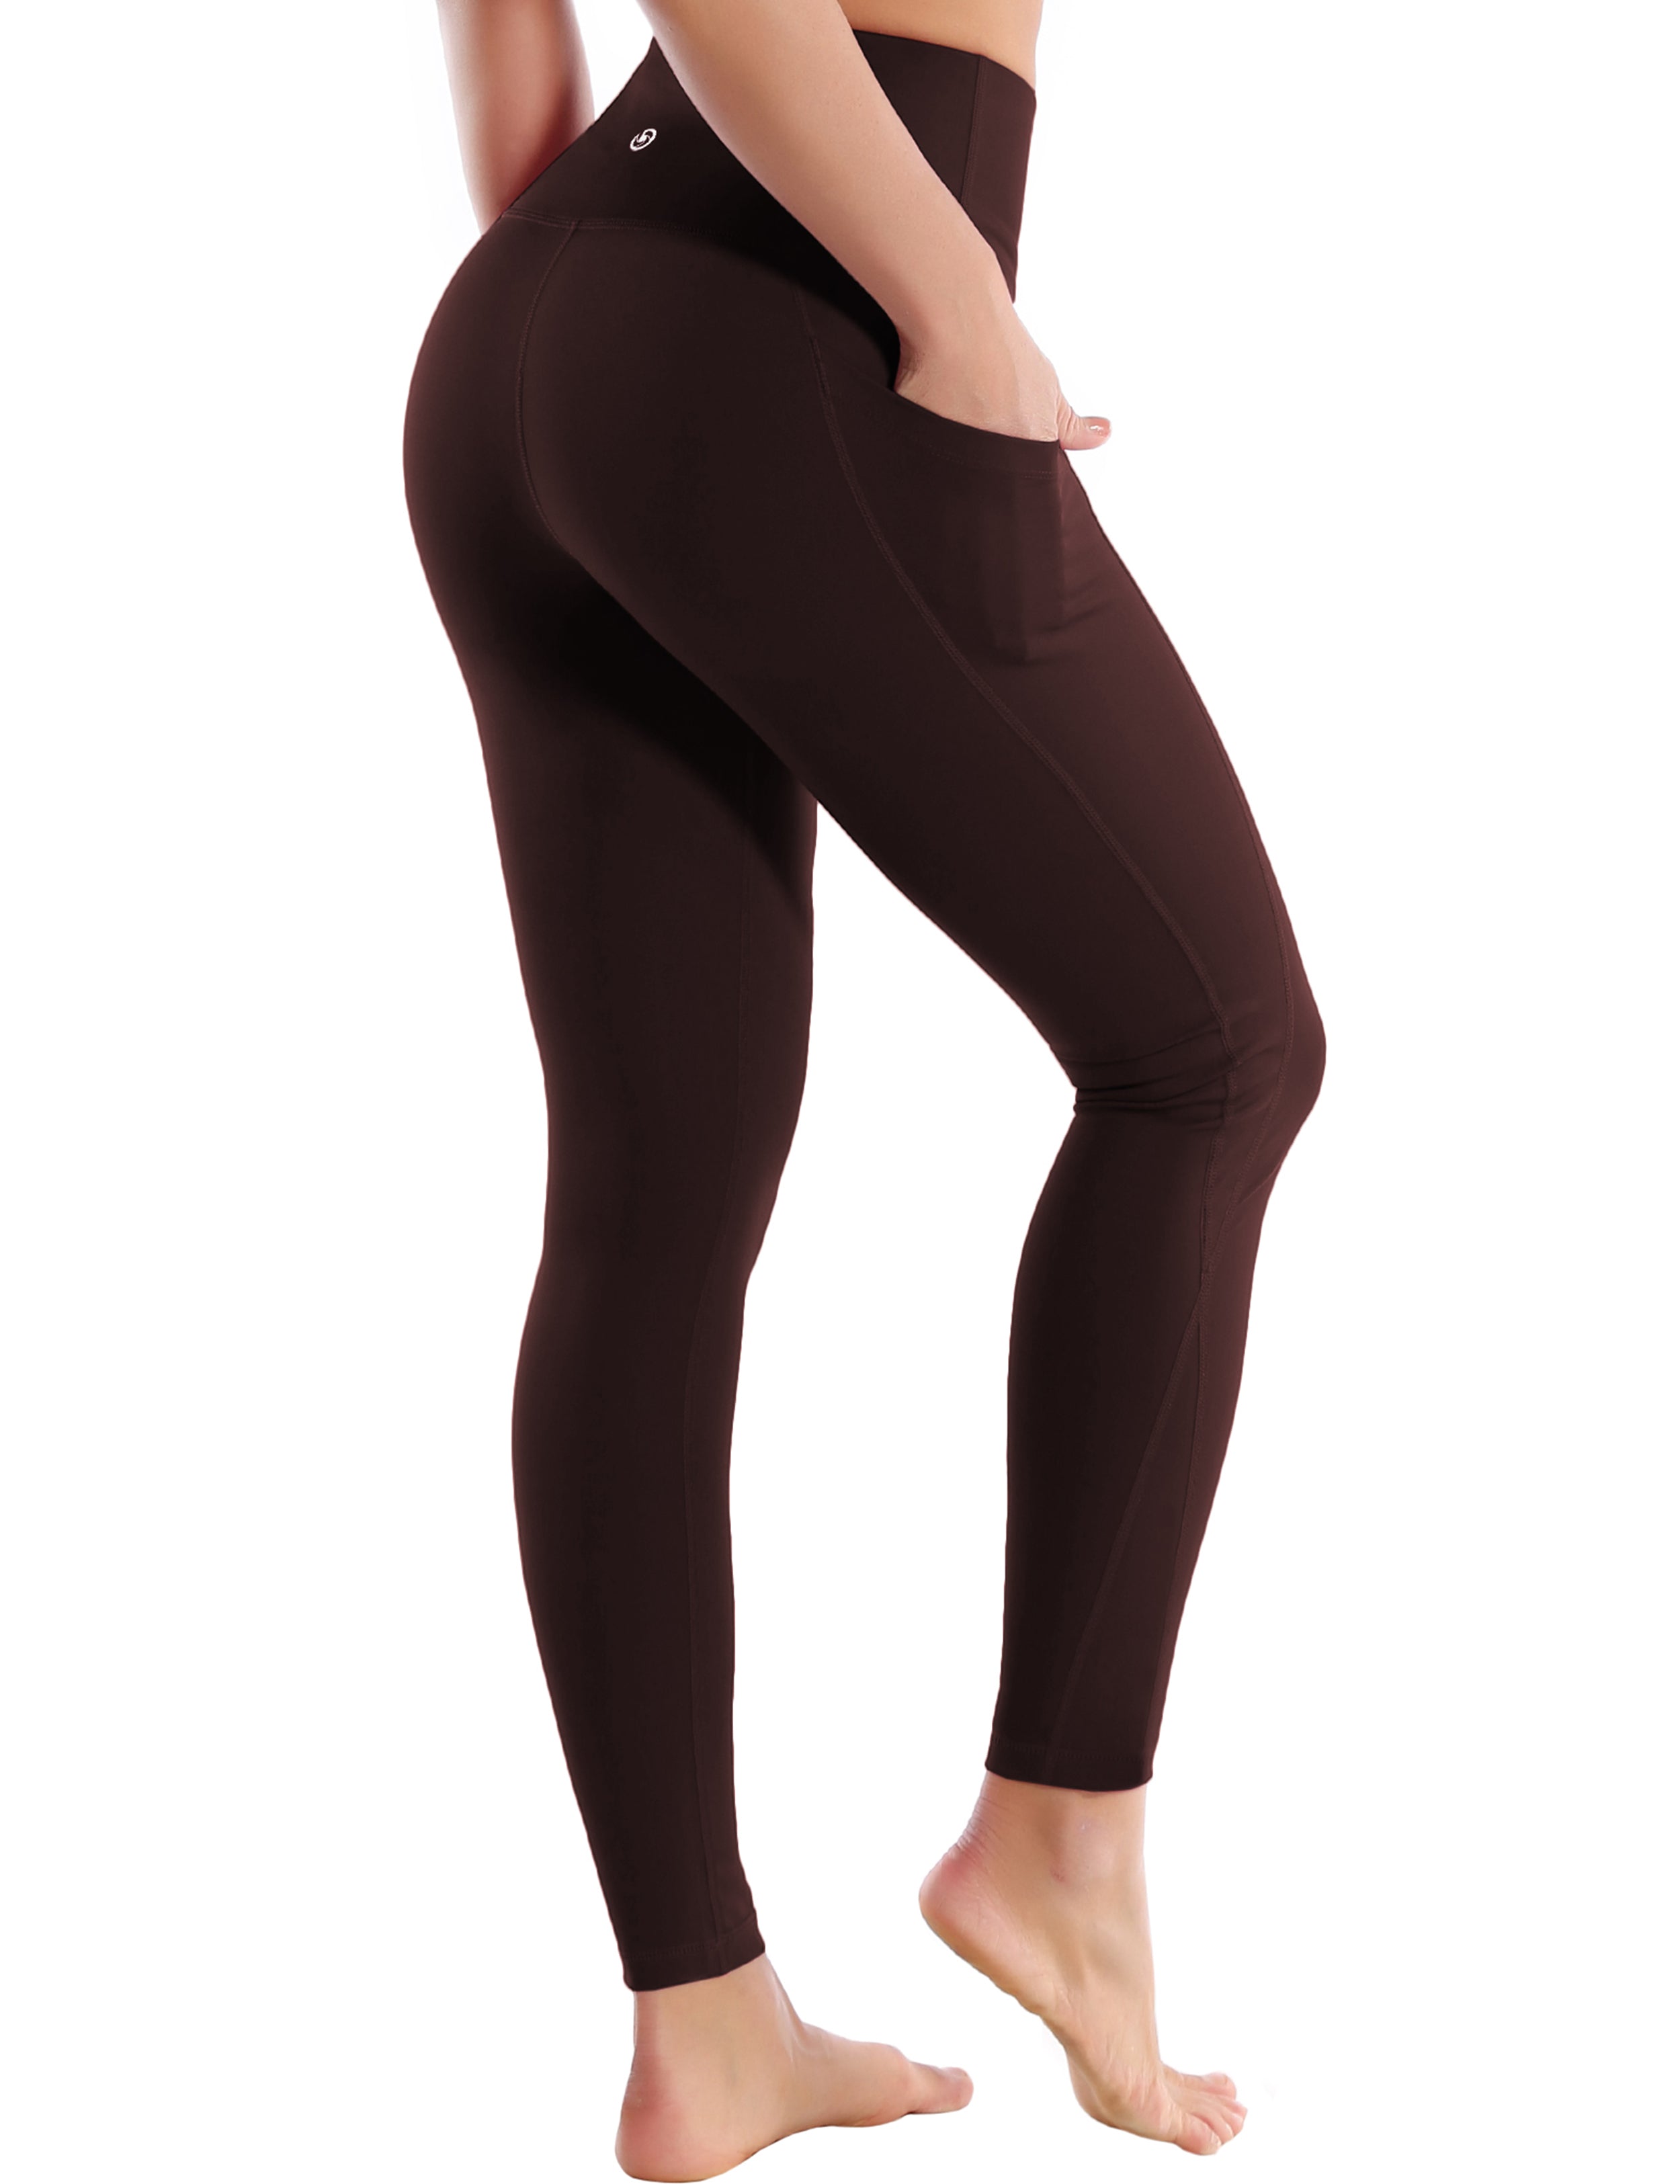 High Waist Side Pockets Golf Pants mahoganymaroon 75% Nylon, 25% Spandex Fabric doesn't attract lint easily 4-way stretch No see-through Moisture-wicking Tummy control Inner pocket